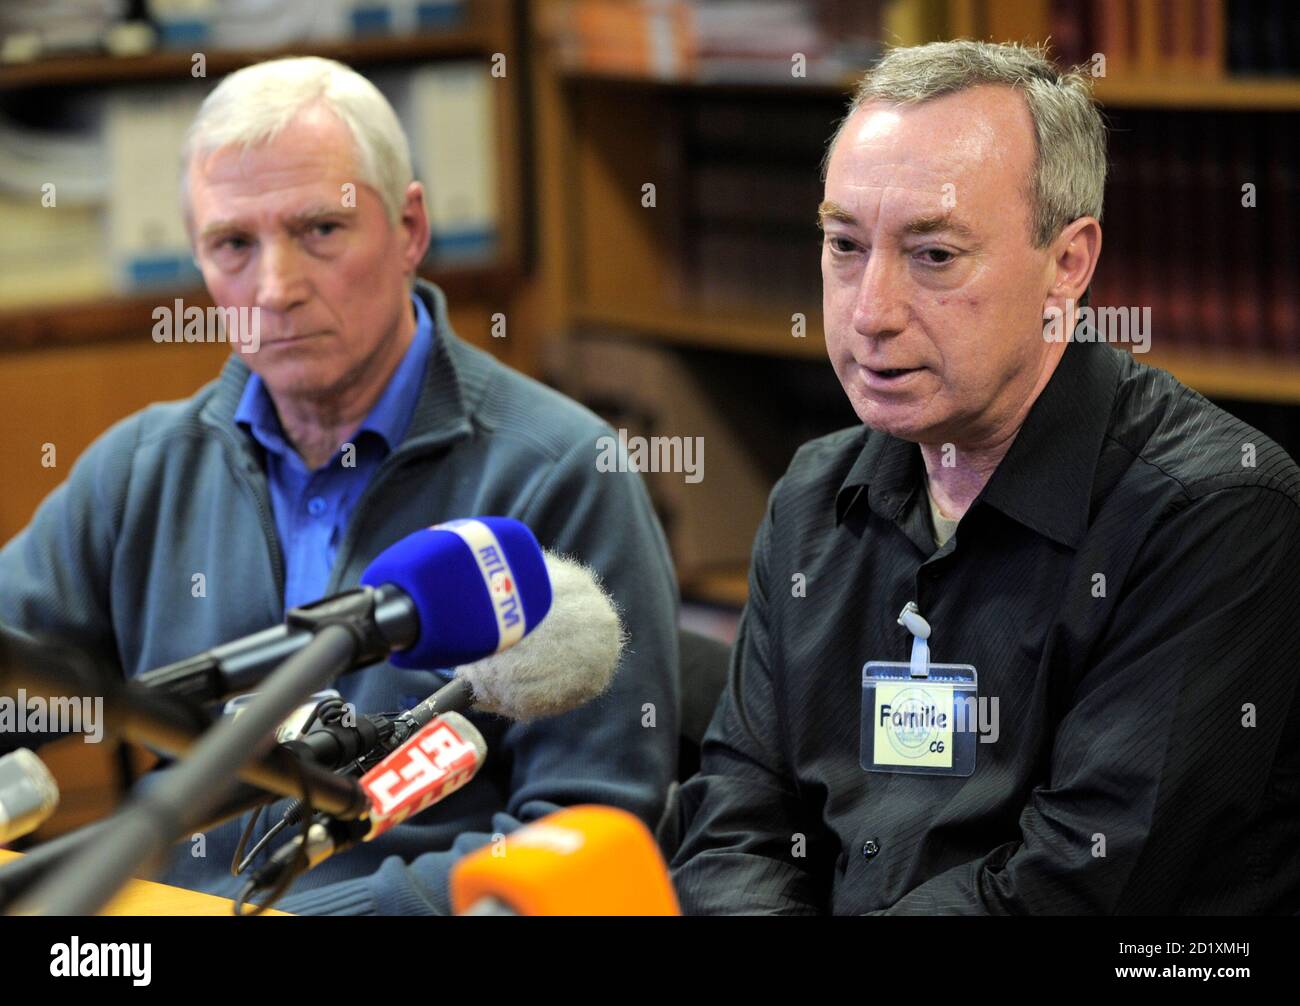 Jean-Pierre Lavillle, father of Isabelle and Jean-Pierre Saison (R), father  of Celine, both victims of French self-confessed serial killer Michel  Fourniret, talk to reporters at Charleville-Mezieres courthouse, France  March 28, 2008. The